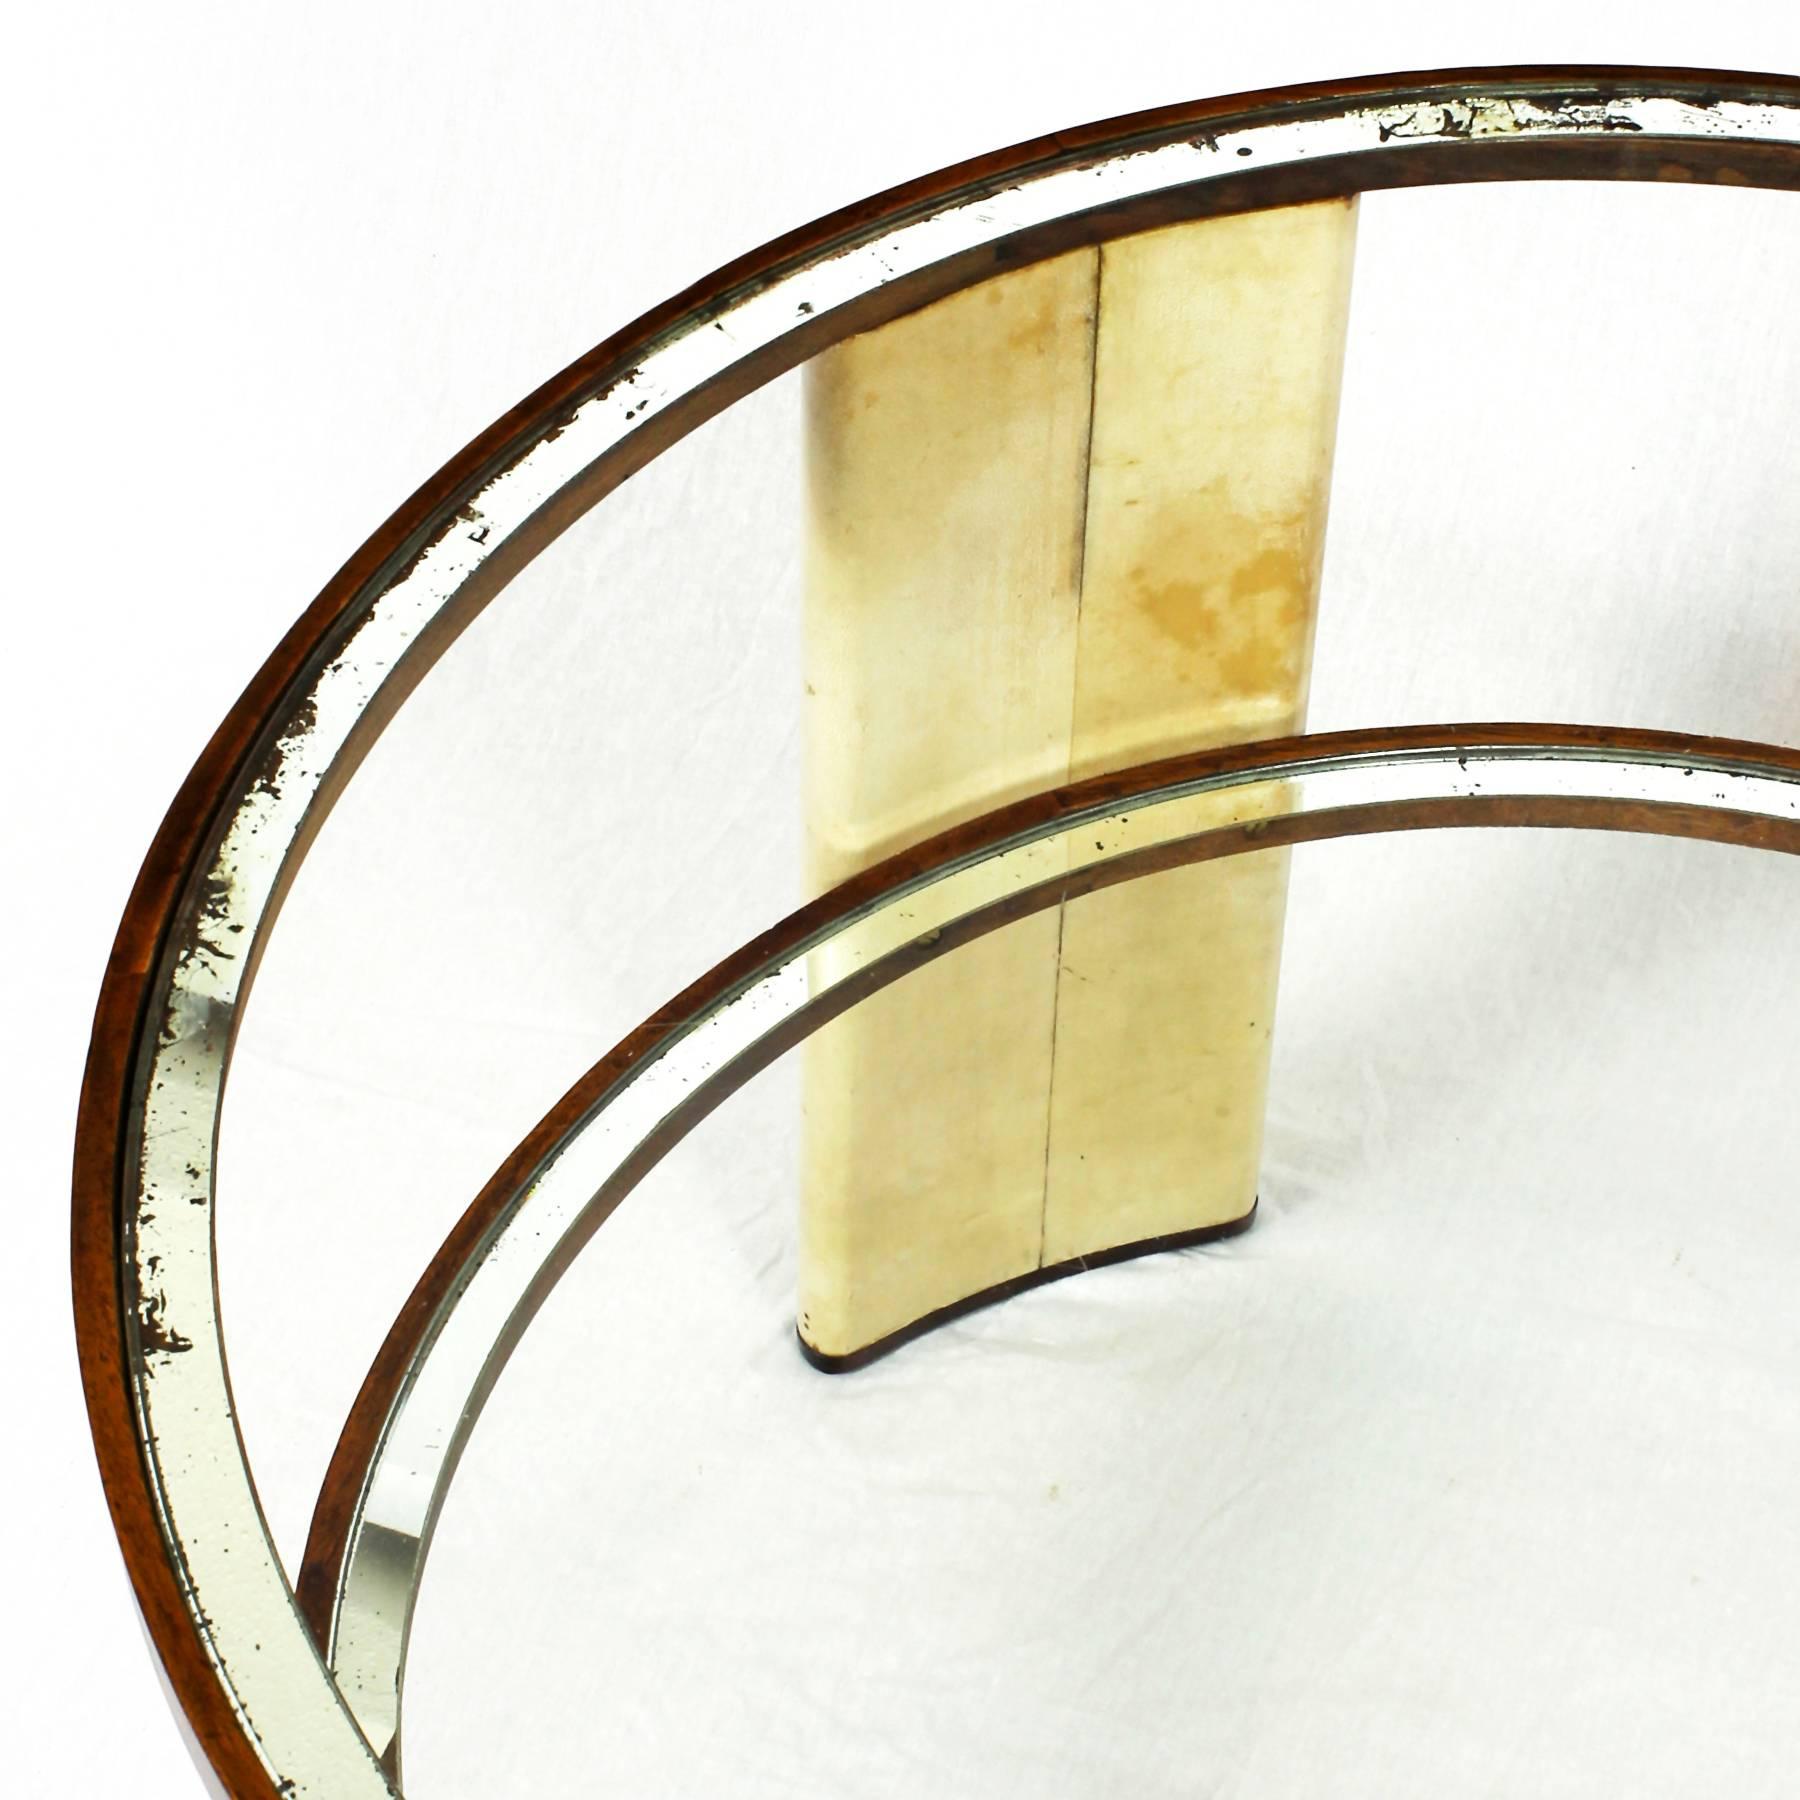 Glass 1930s Art Deco Side Table, parchment and walnut, mirrored glass. Italy